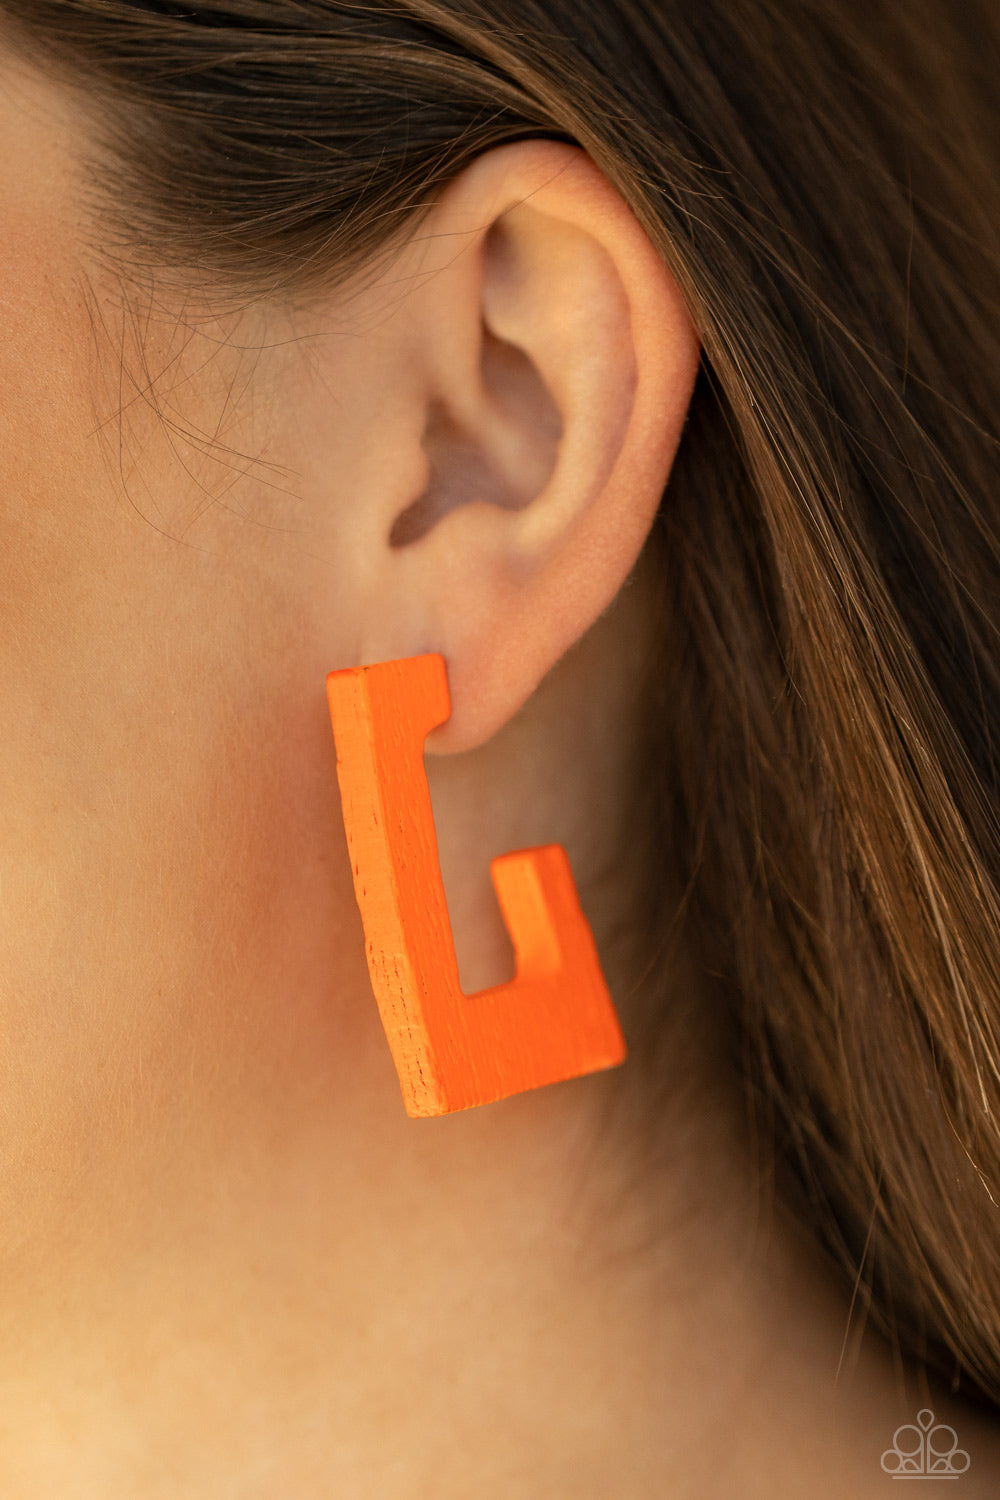 Paparazzi Accessories The Girl Next OUTDOOR - Orange Earrings - Lady T Accessories